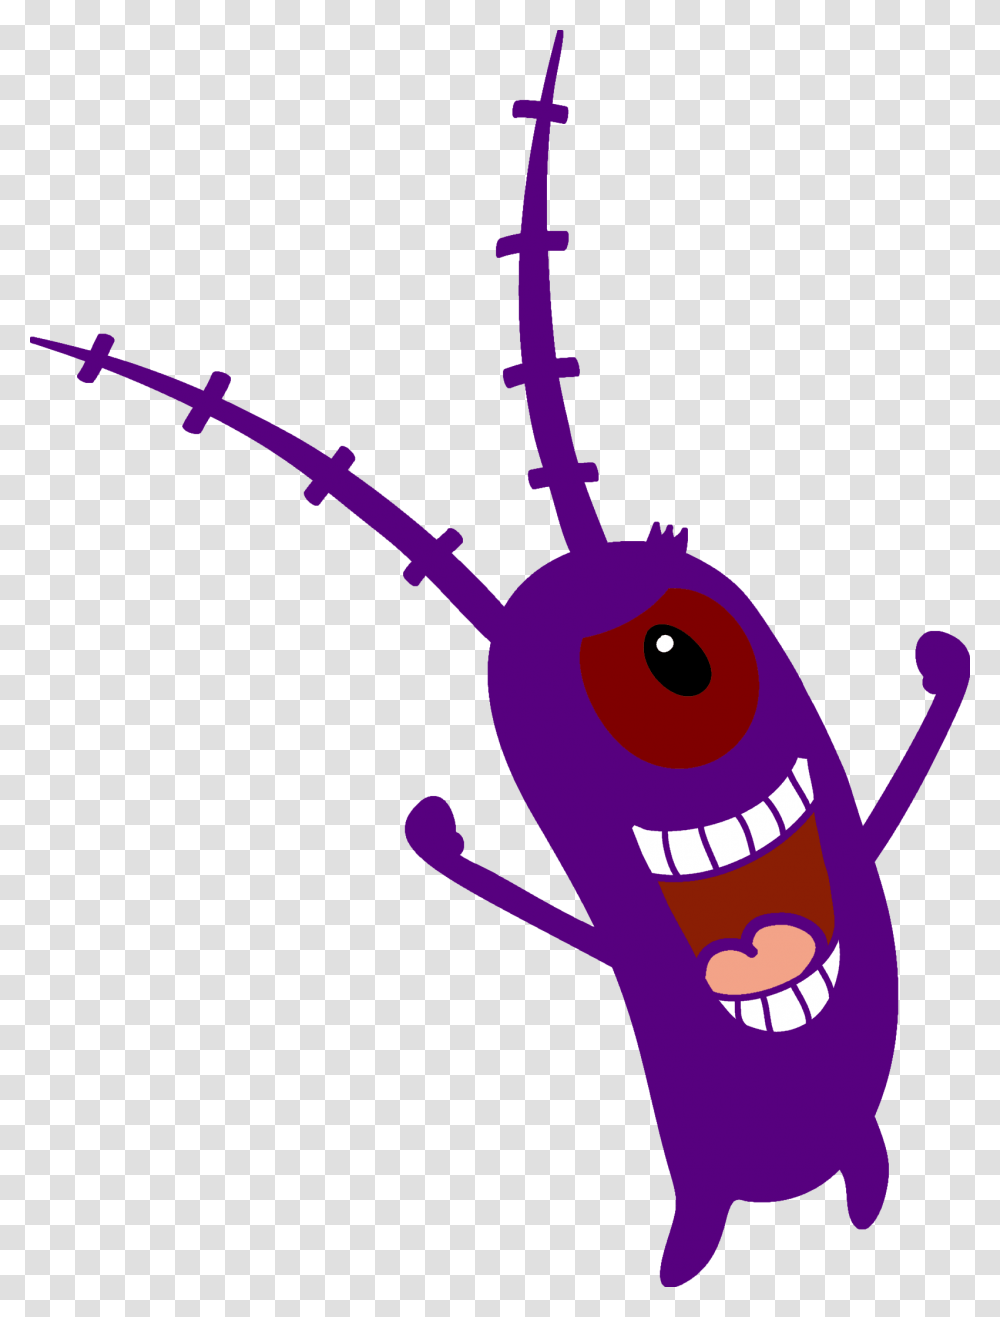 Happy Spooktober From Jbw, Insect, Invertebrate, Animal, Cockroach Transparent Png